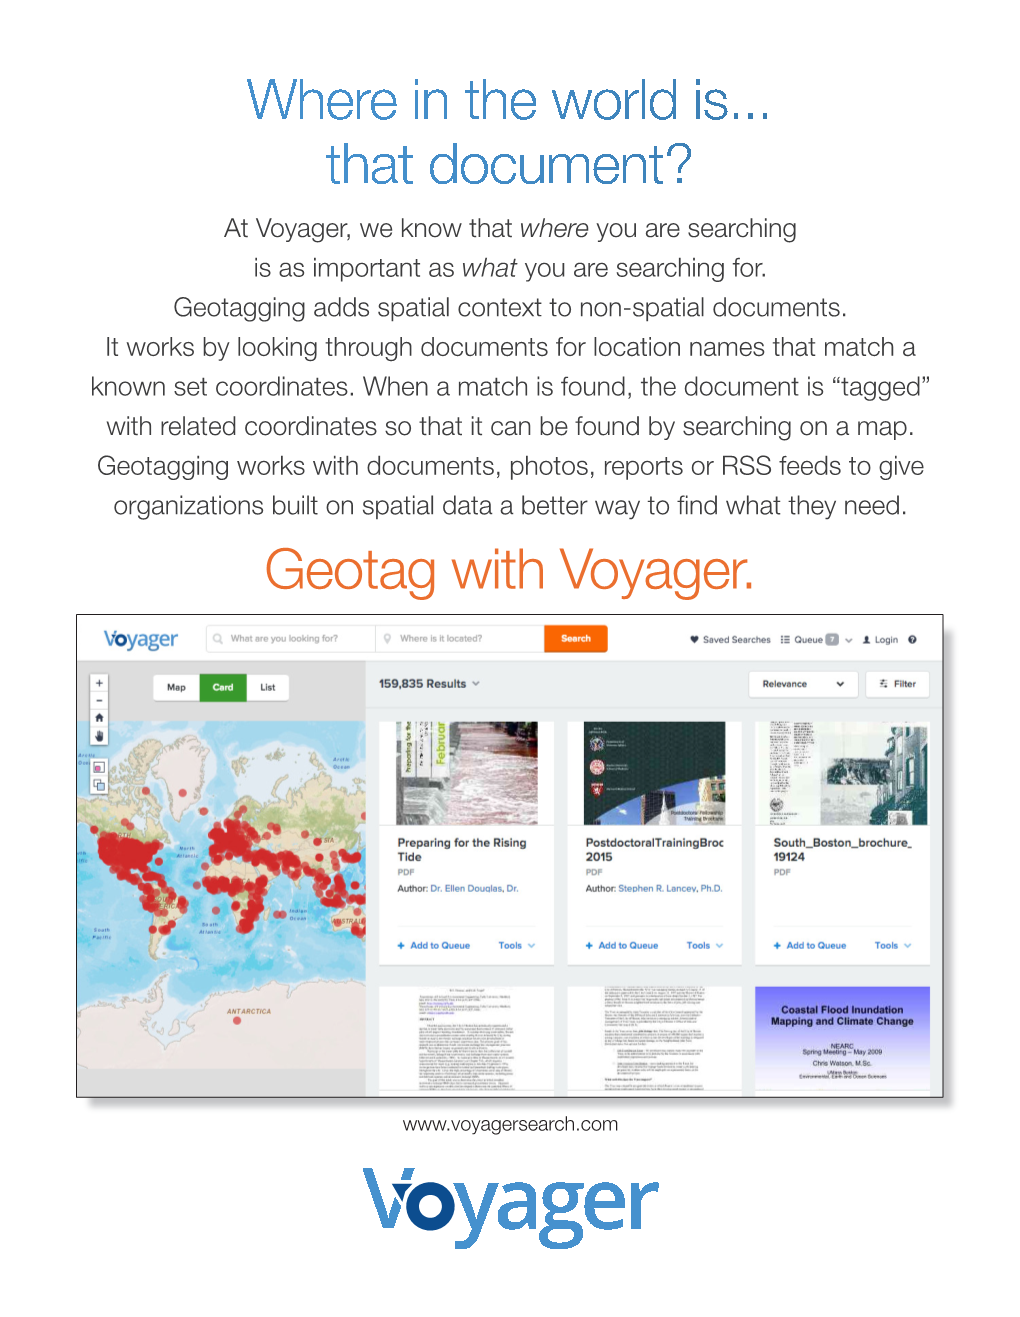 Geotagging Adds Spatial Context to Non-Spatial Documents